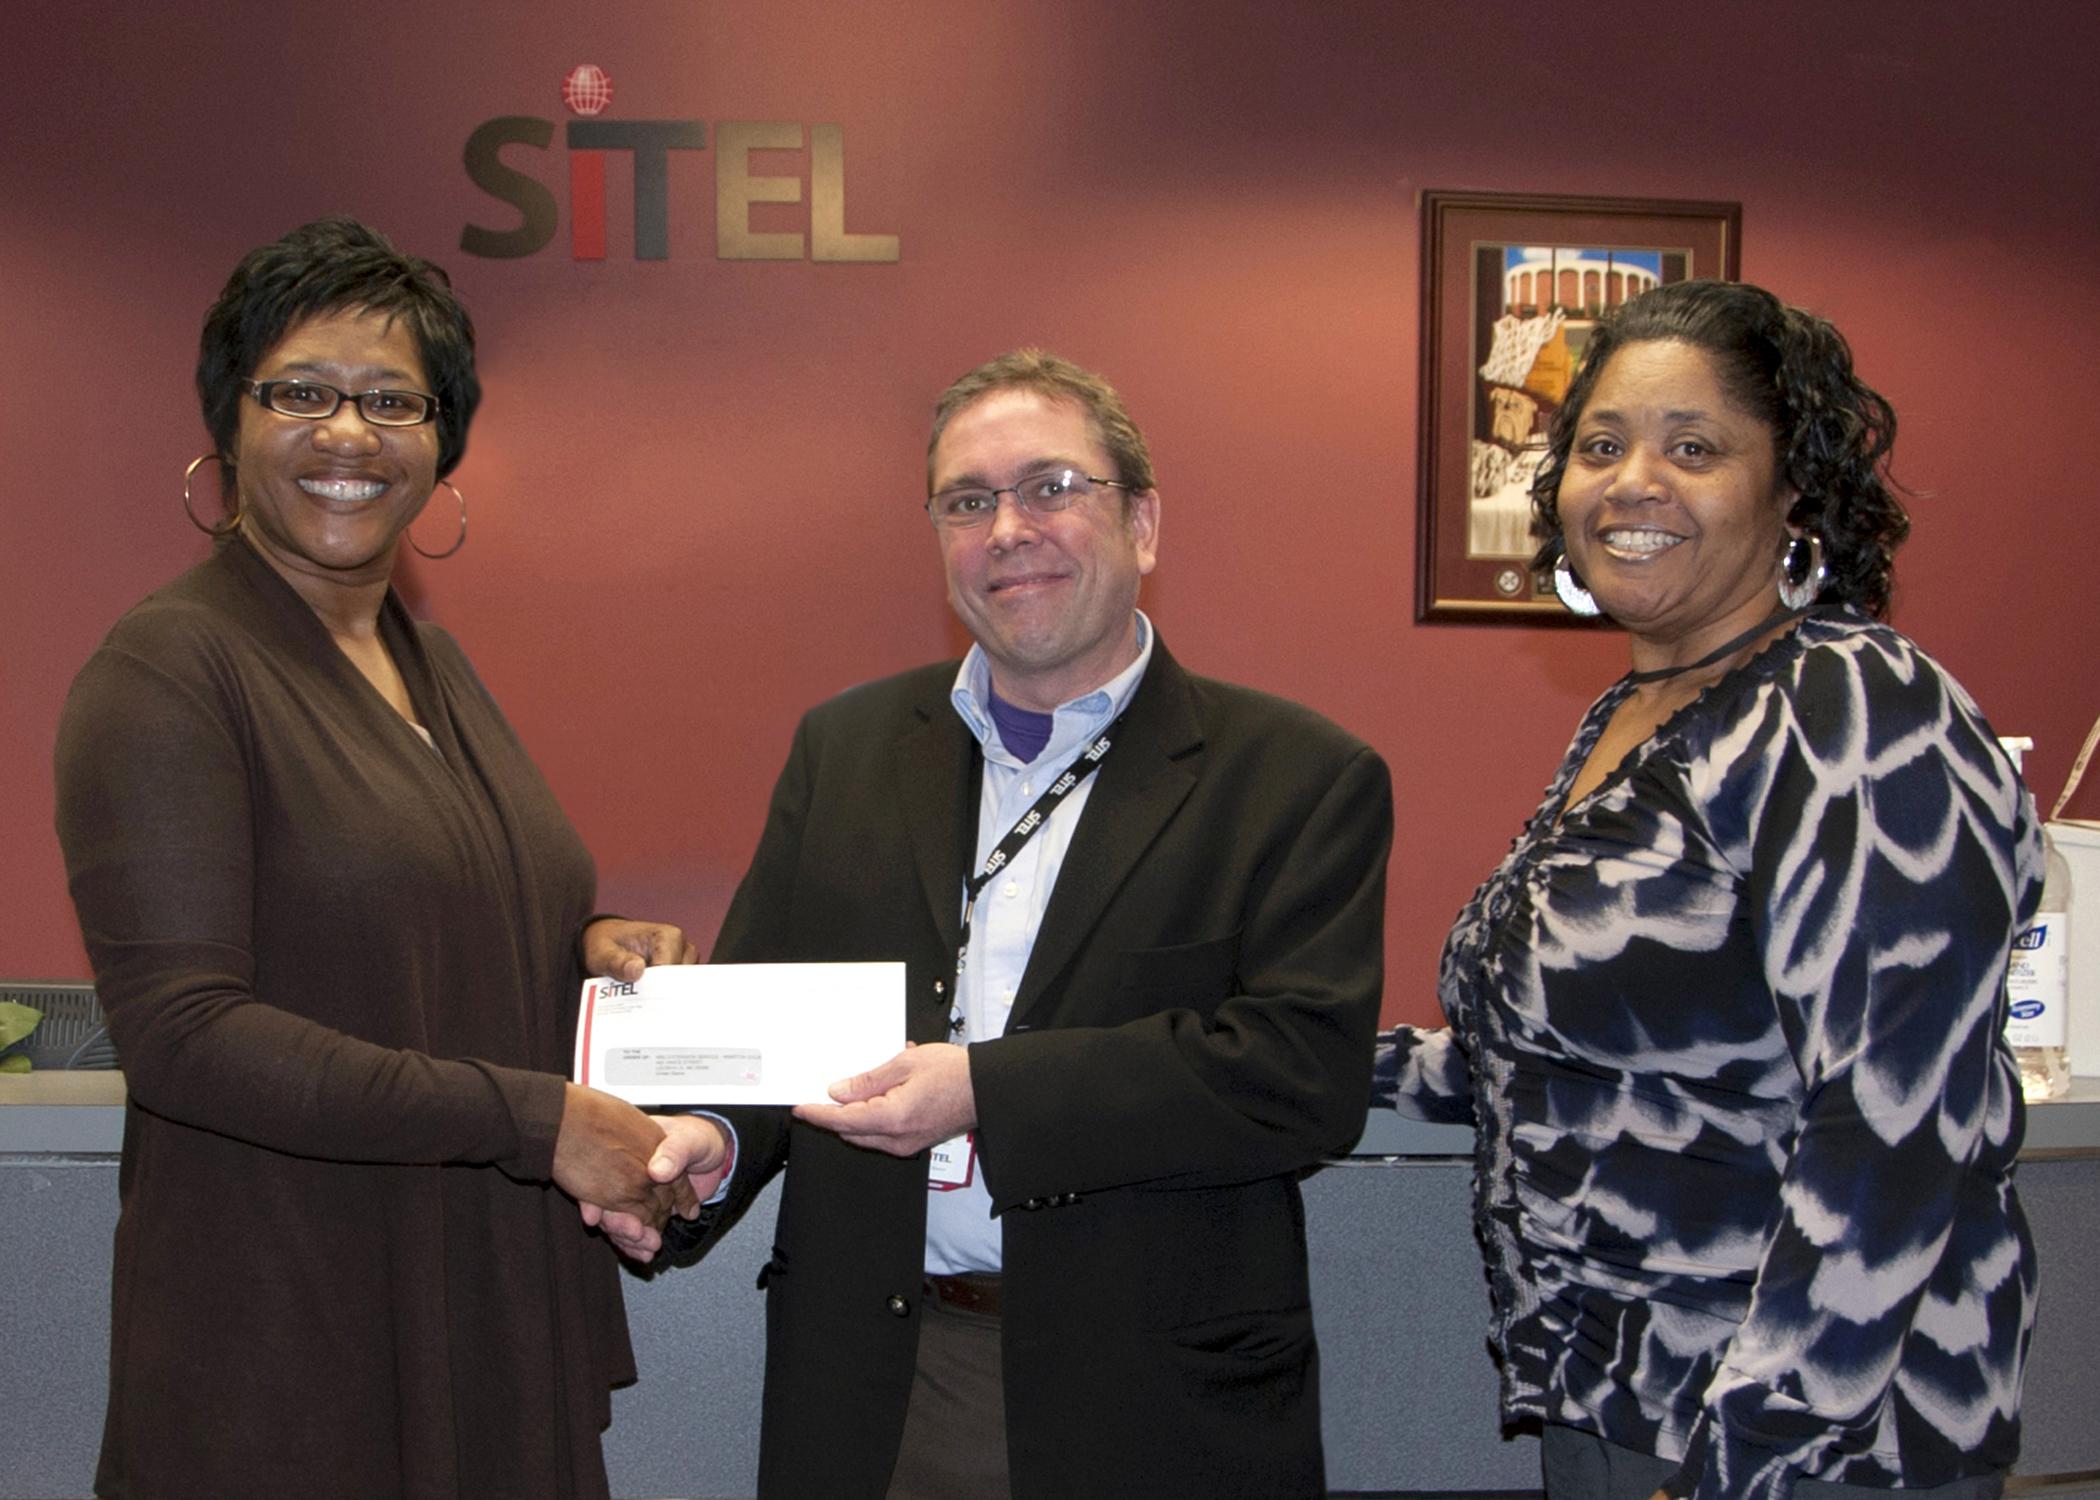 Sandra Jackson, left, a Mississippi State University Extension Service program associate, accepts a check from Dave Billington, Sitel Starkville site director, on behalf of Sitel’s employee recognition program. Stella Jackson, right, Sitel’s 2012 International Customer Management Institute Supervisor of the Year, chose to support the Winston County 4-H Youth Development program through Sitel’s recognition program because of the positive impact it has on local youth. (Photo by MSU Ag Communications/Kat Lawre